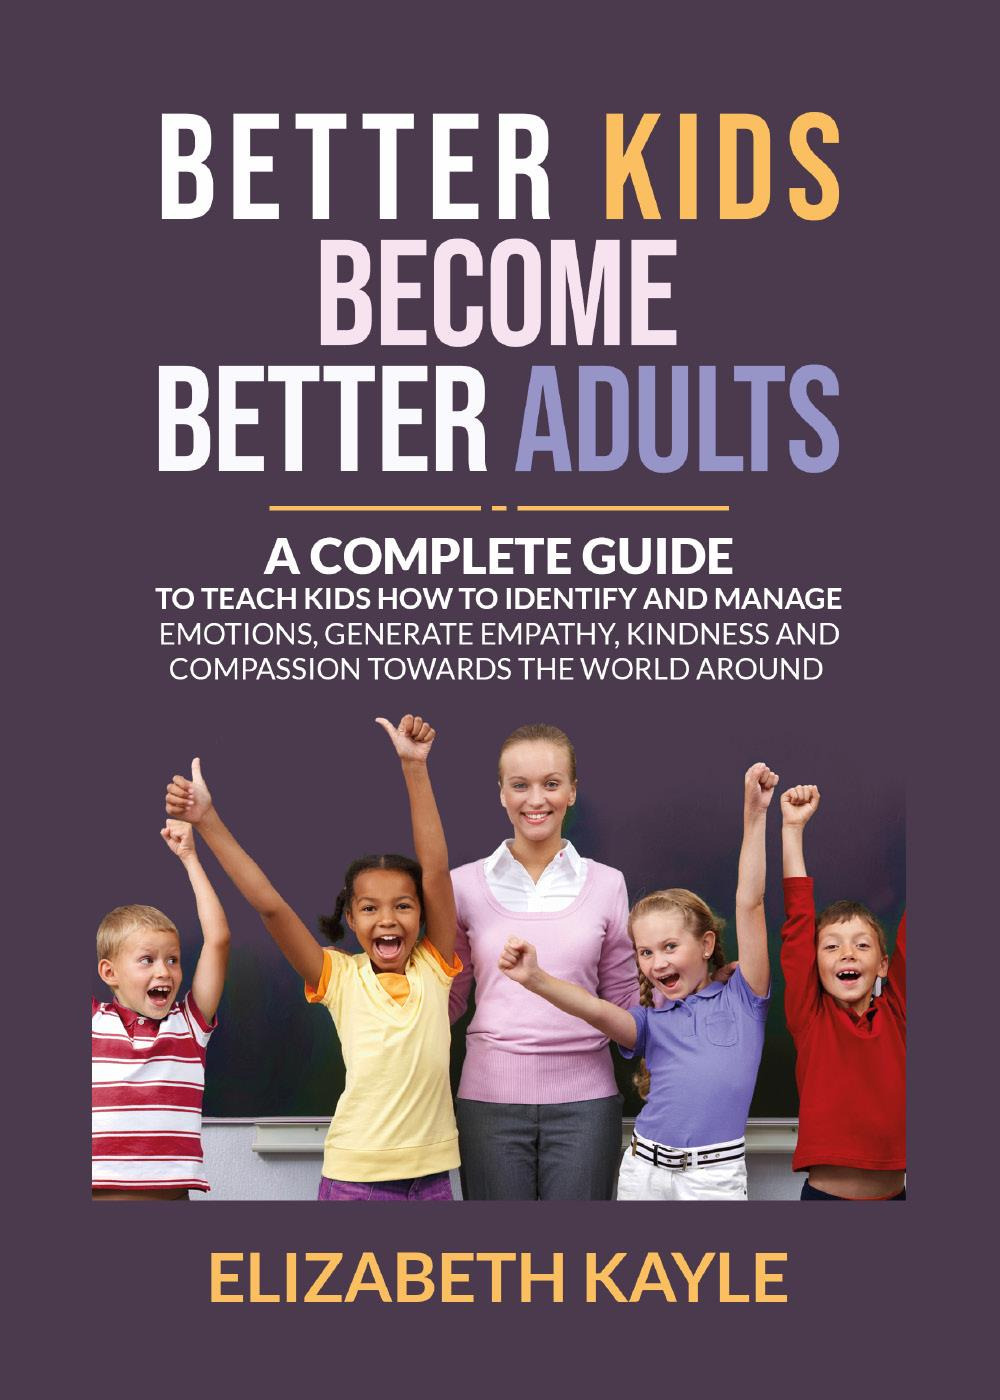 Better kids become better adults. A Complete Guide To Teach Kids How to Identify and Manage Emotions, Generate Empathy, Kindness, and Compassion. Ediz. italiana